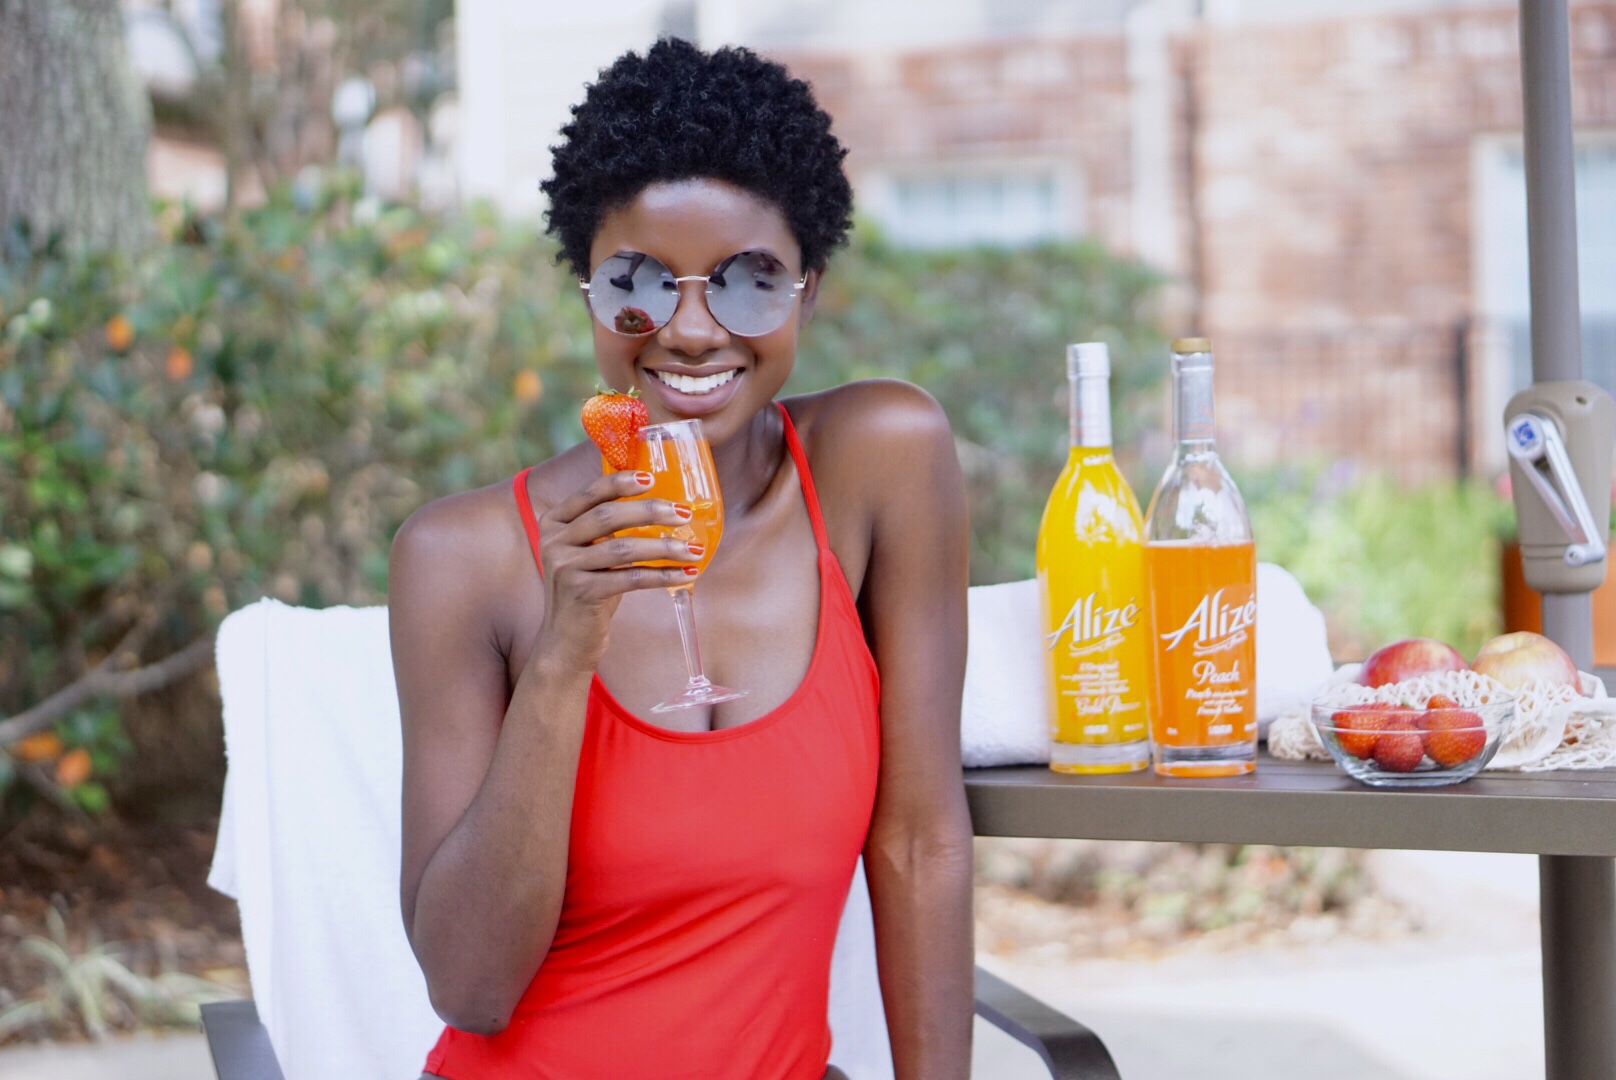 Summer Cocktails, easy summer cocktails, Alize, Alize recipes, fruity cocktails, fruity drinks, twa, dark skin girl, red swimsuit, short natural hair, pool side, relax by the pool, pool inspo, round sunglasses